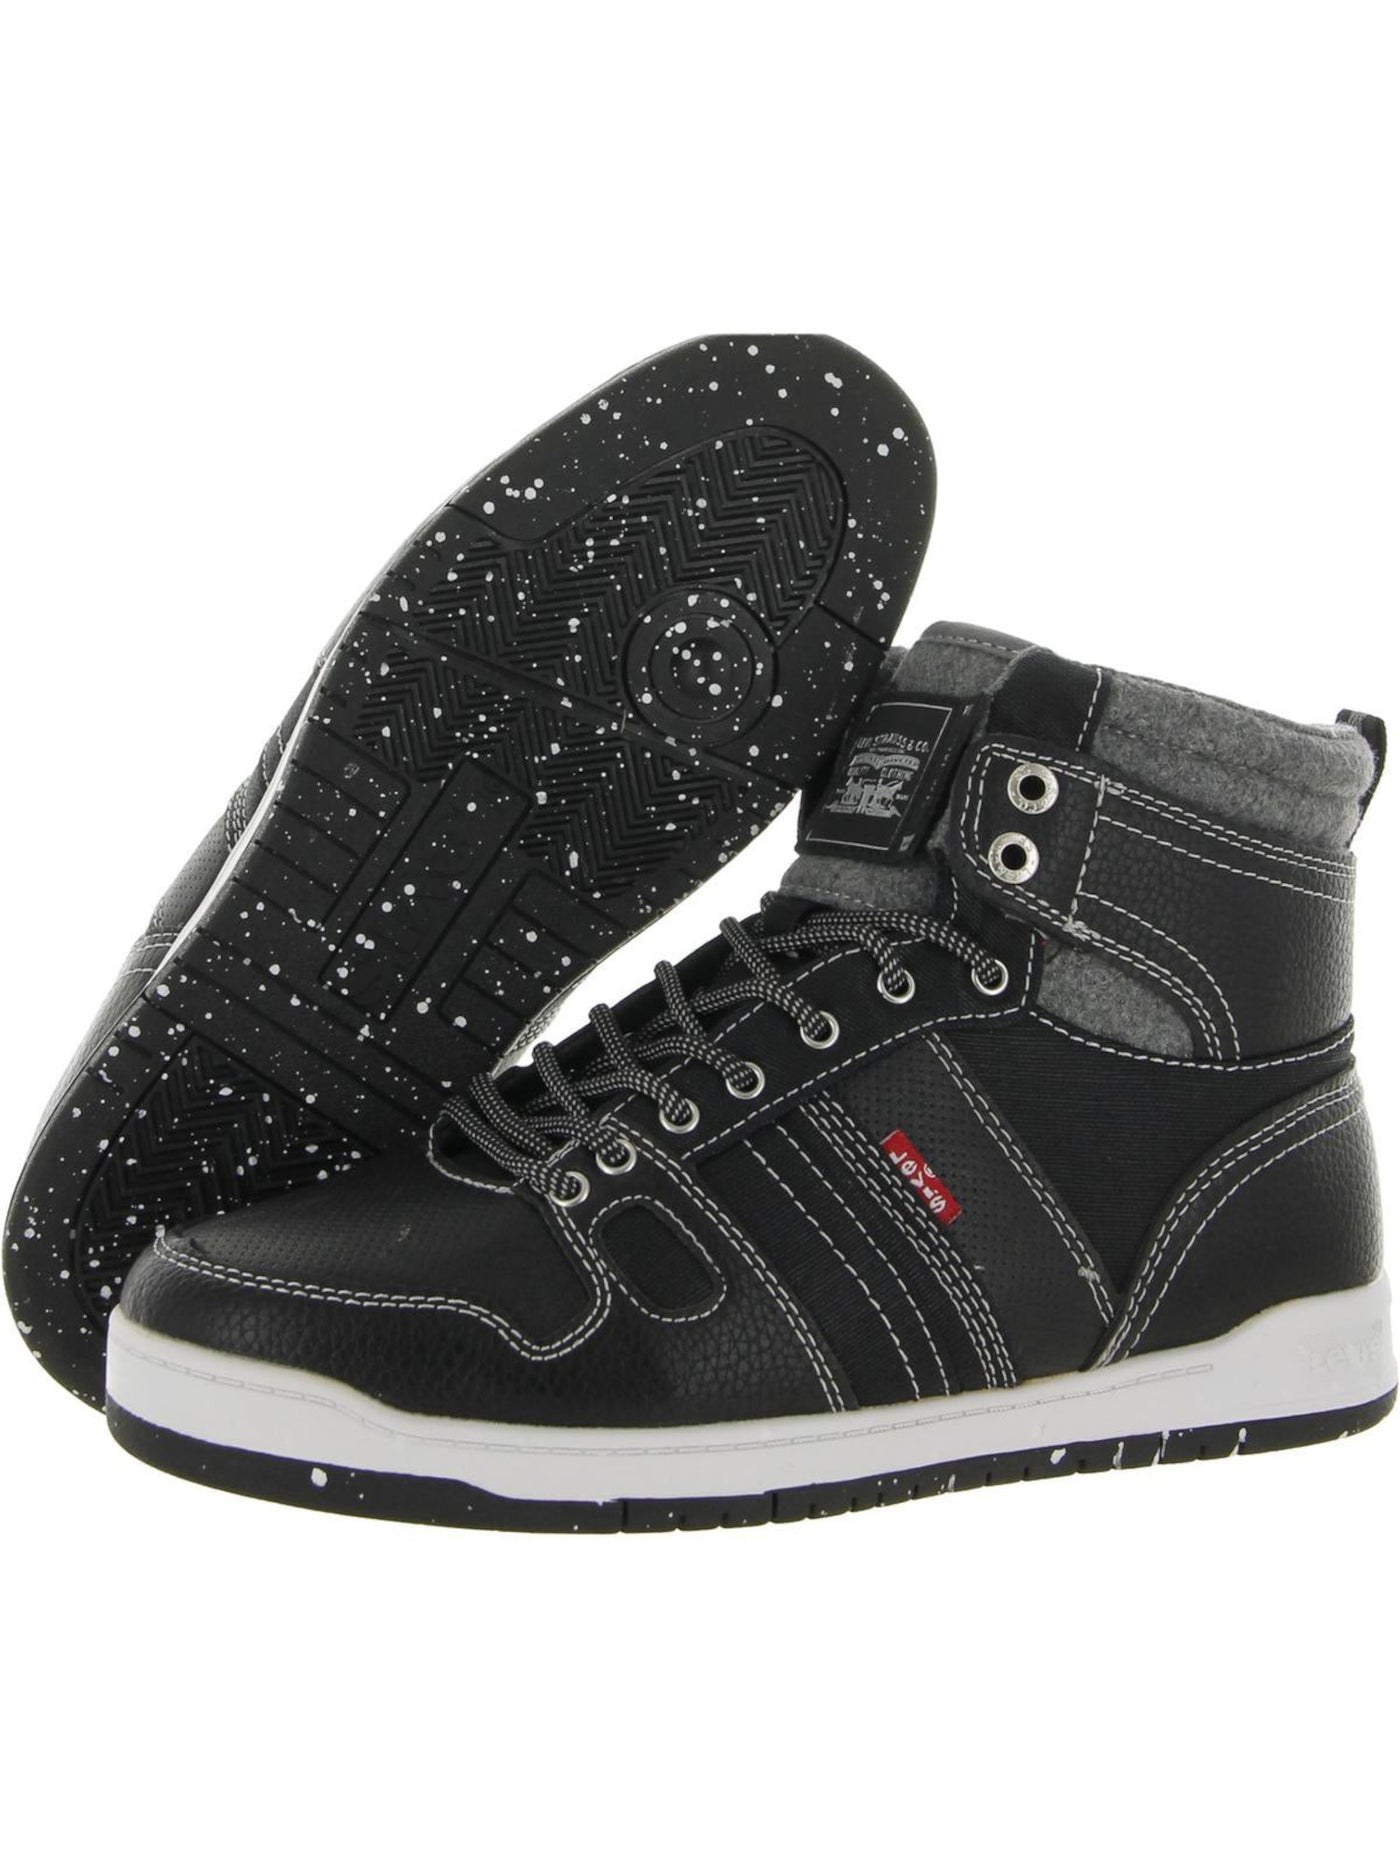 LEVI'S Womens Black Logo Removable Insole Cushioned Bb Hi Round Toe Platform Lace-Up Athletic Sneakers Shoes 8.5